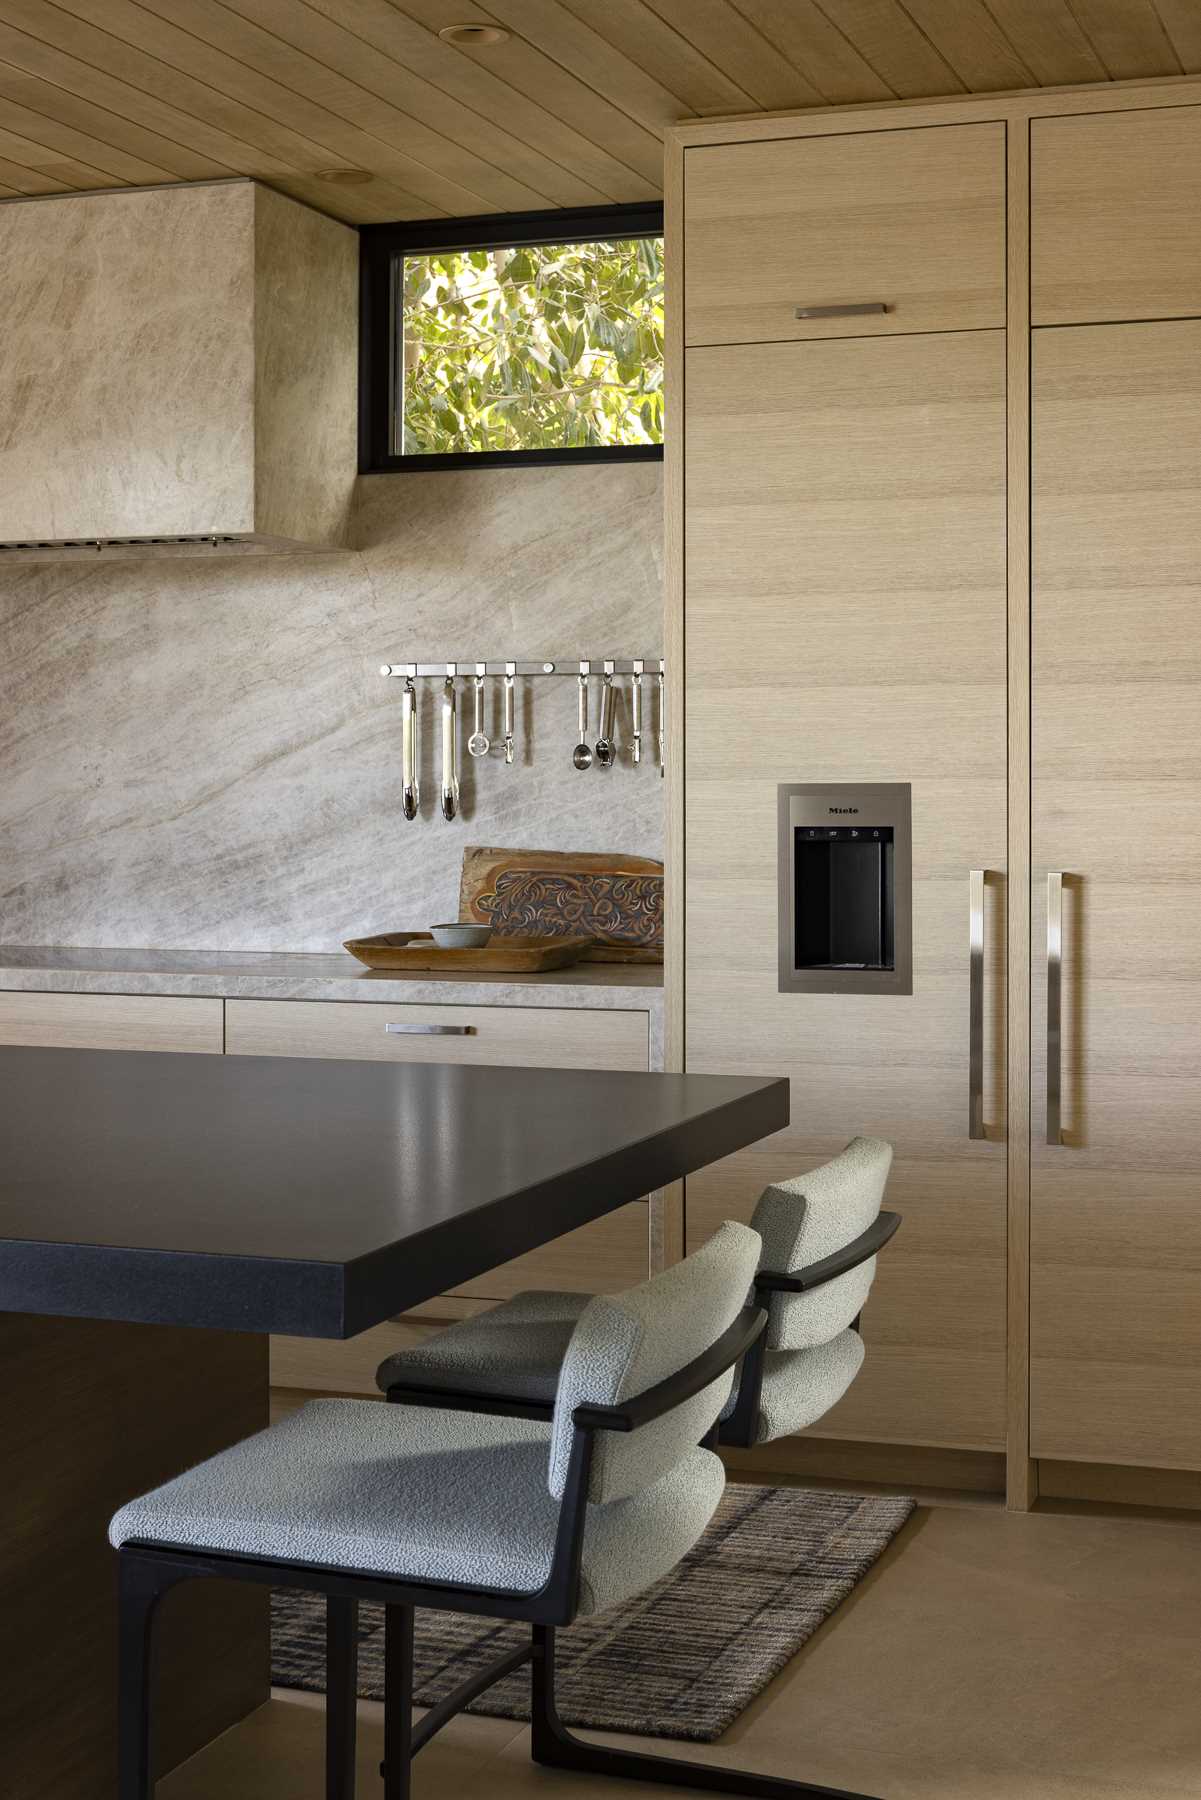 The dining area is adjacent to the kitchen, which includes light wood cabinets and an island with a black countertop.